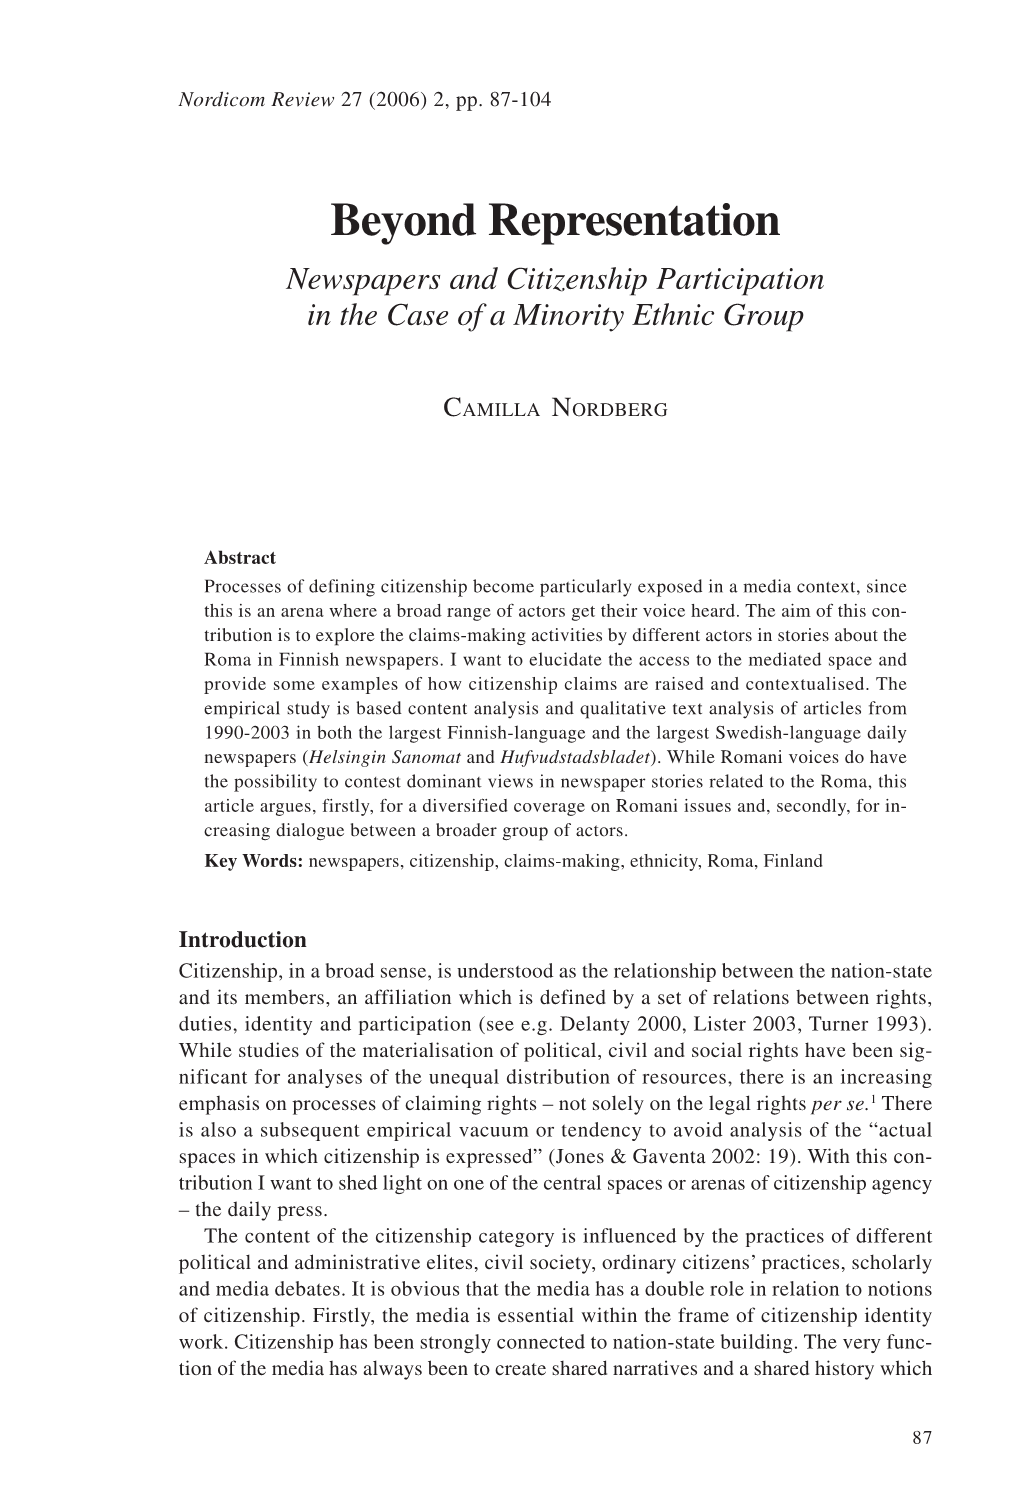 Beyond Representation Newspapers and Citizenship Participation in the Case of a Minority Ethnic Group